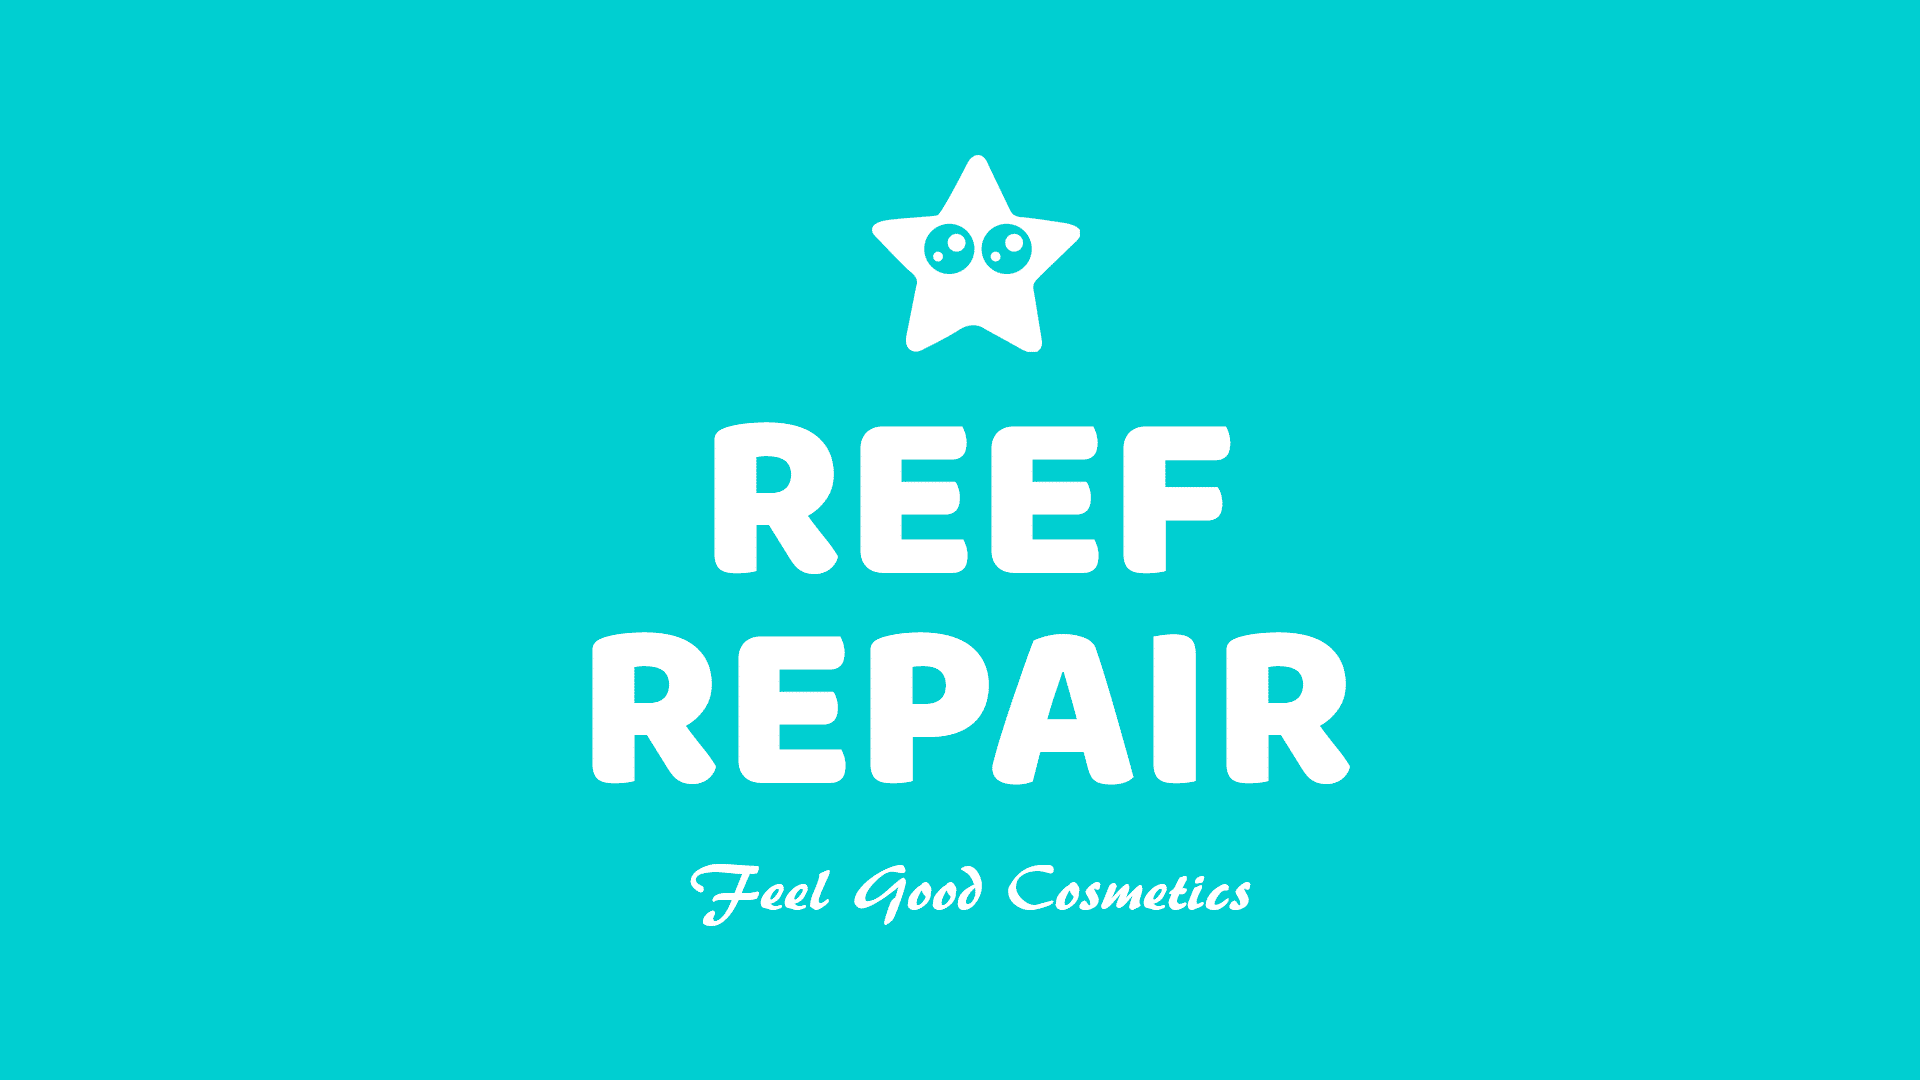 Reef Repair Reef Safe Sunscreen is a natural, biodegradable, coral friendly, waterproof SPF 50 Zinc Oxide sunblock designed to protect your skin & coral reefs!